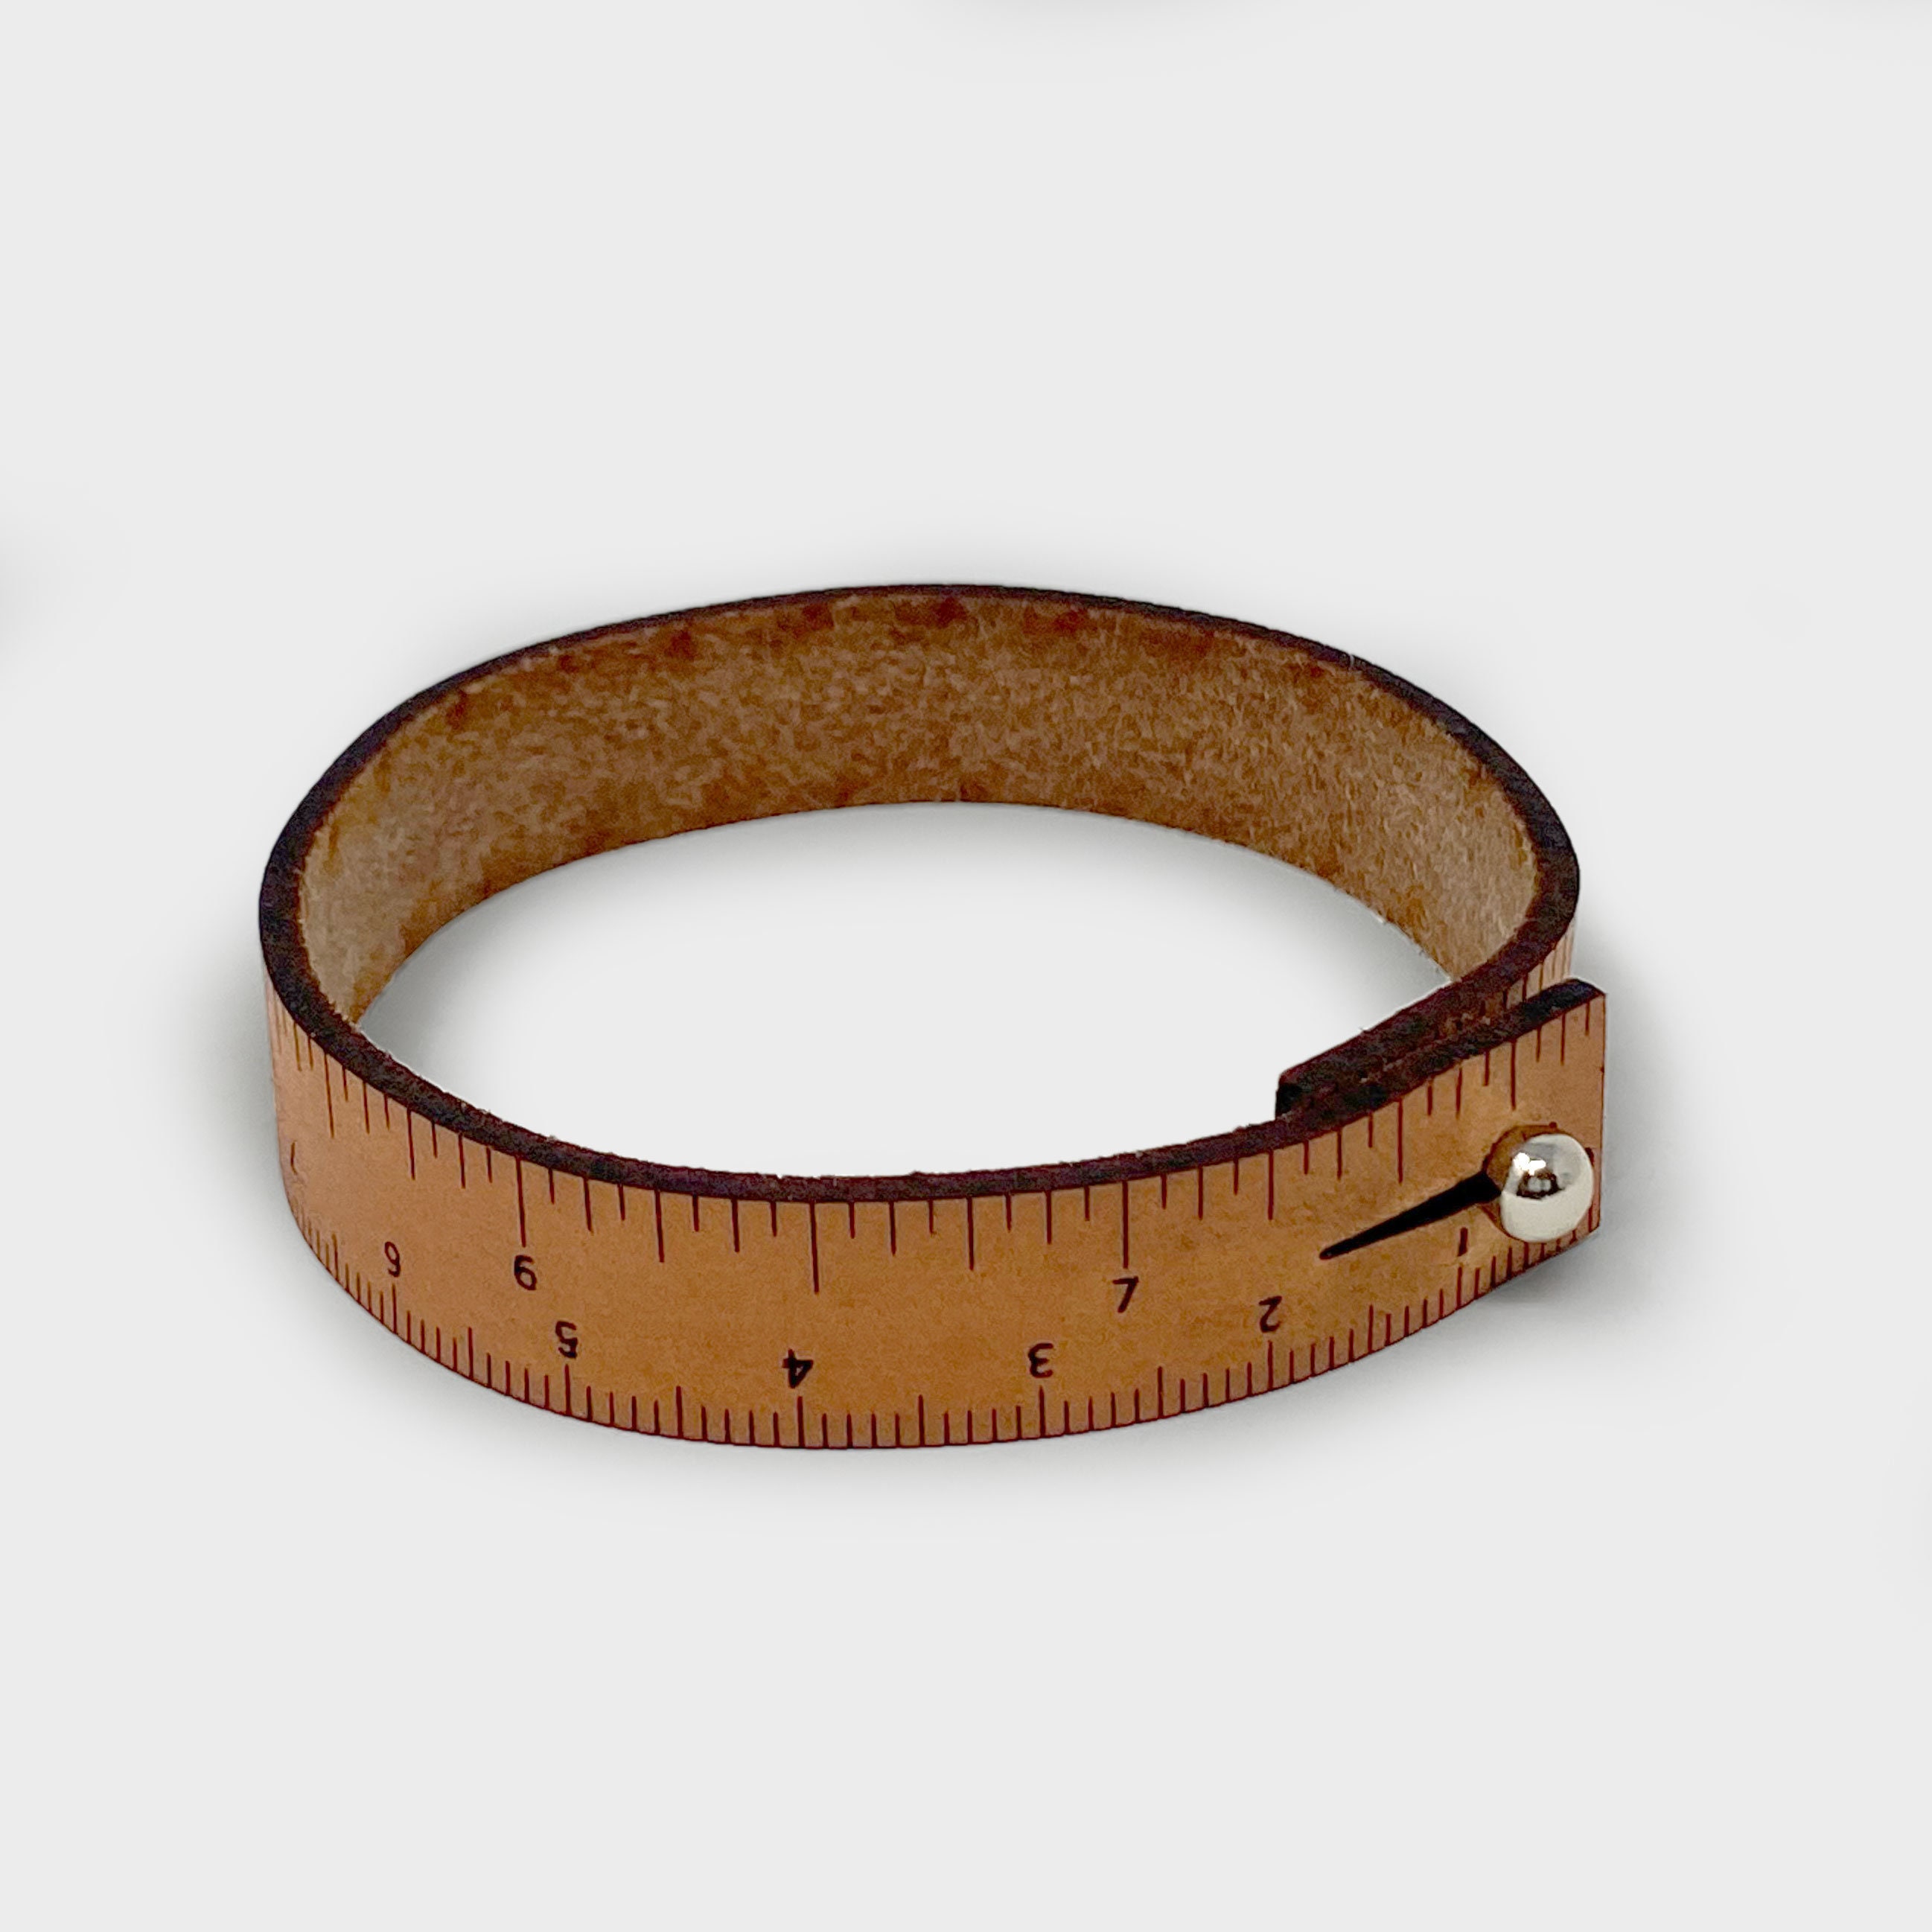 etc birthday Leather Wrist Ruler Bracelet Functional and Attractive gift idea for quilters holidays sewists